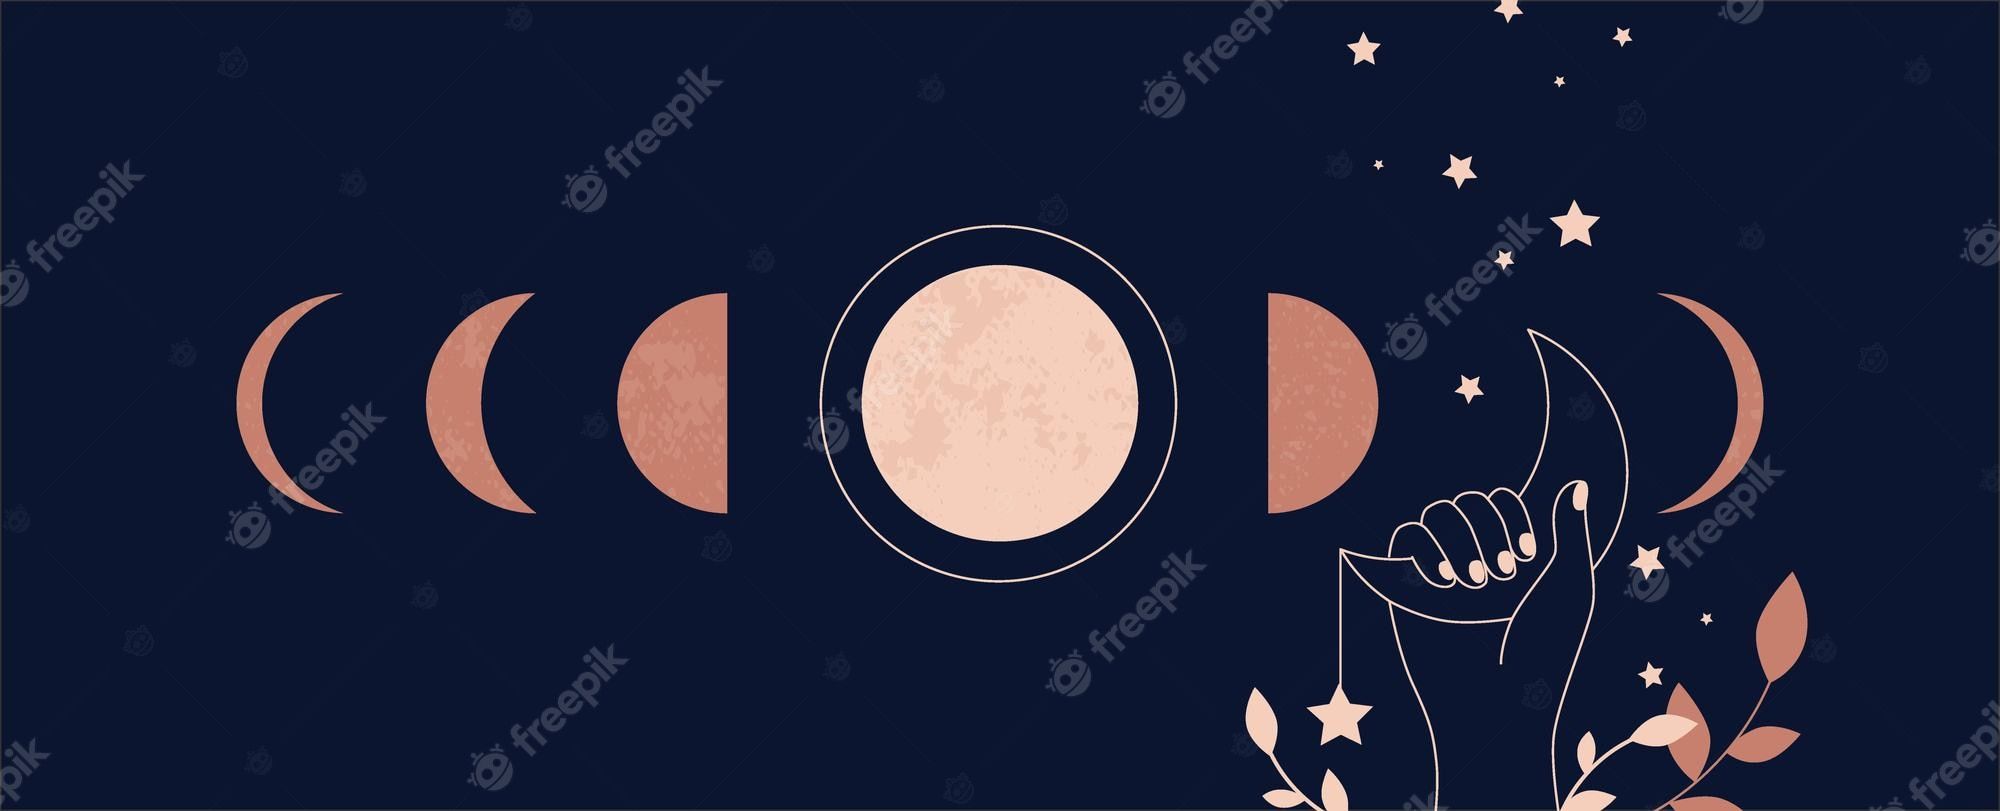 Moon phases banner with female hand holding a crescent moon. Vector illustration. - Moon phases